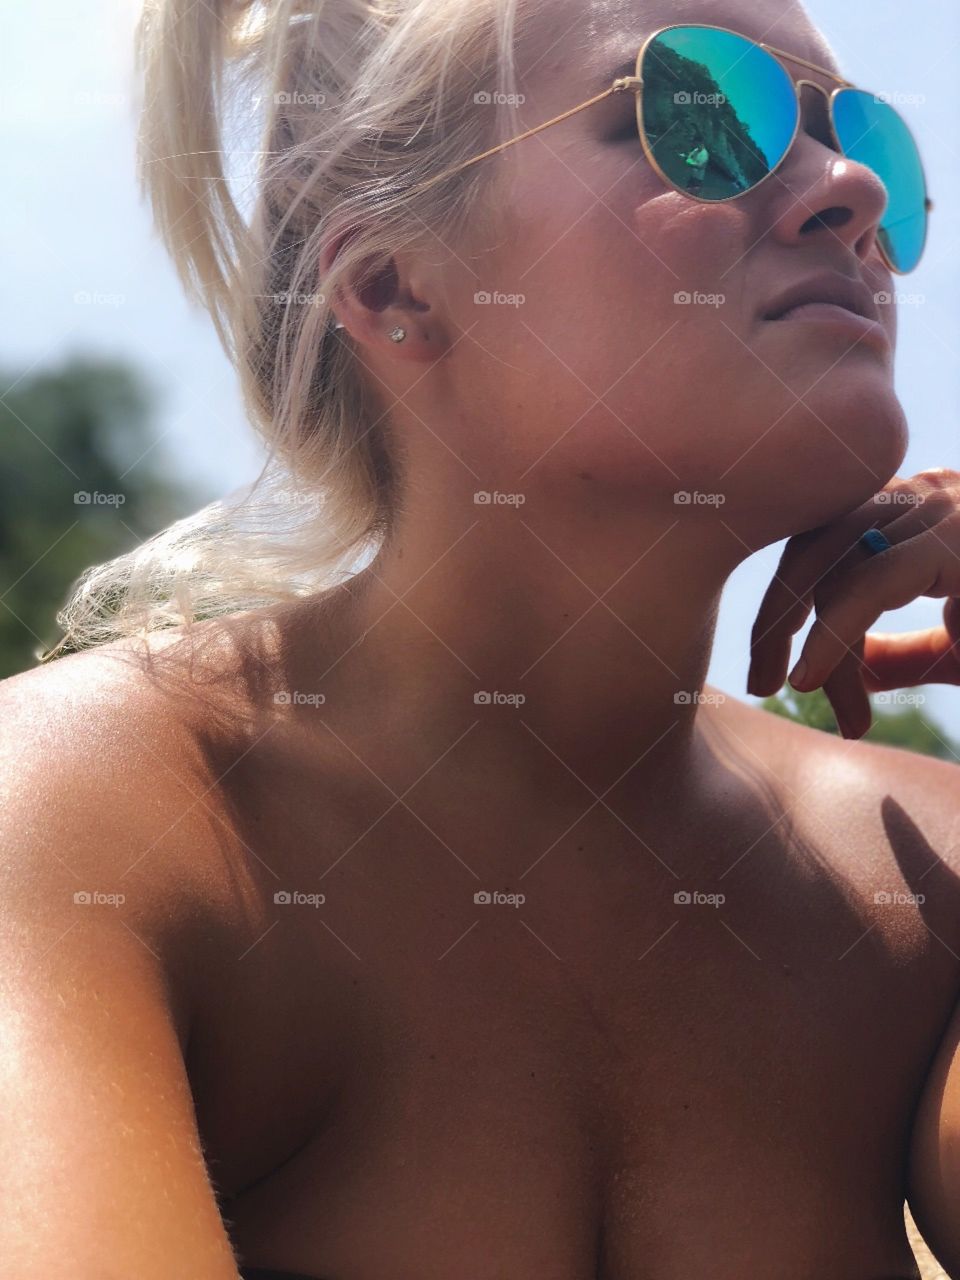 Raw natural lighting on this blonde beauty. No makeup fresh tanned skin on a canoe trip.